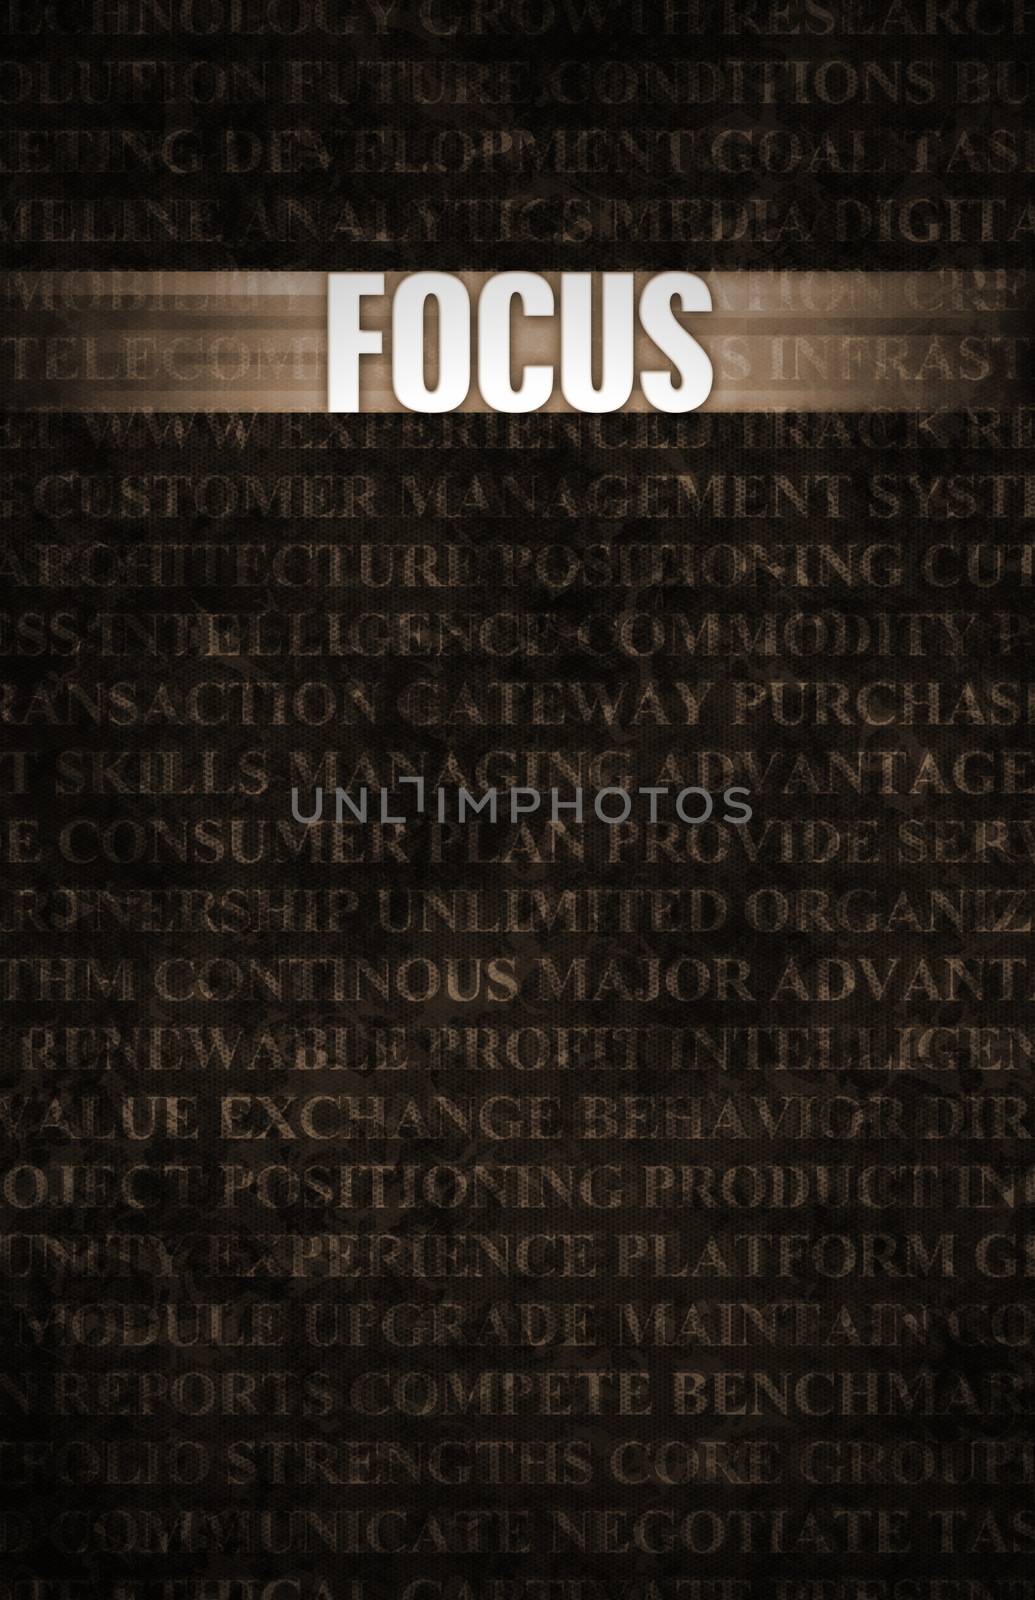 Focus in Business as Motivation in Stone Wall